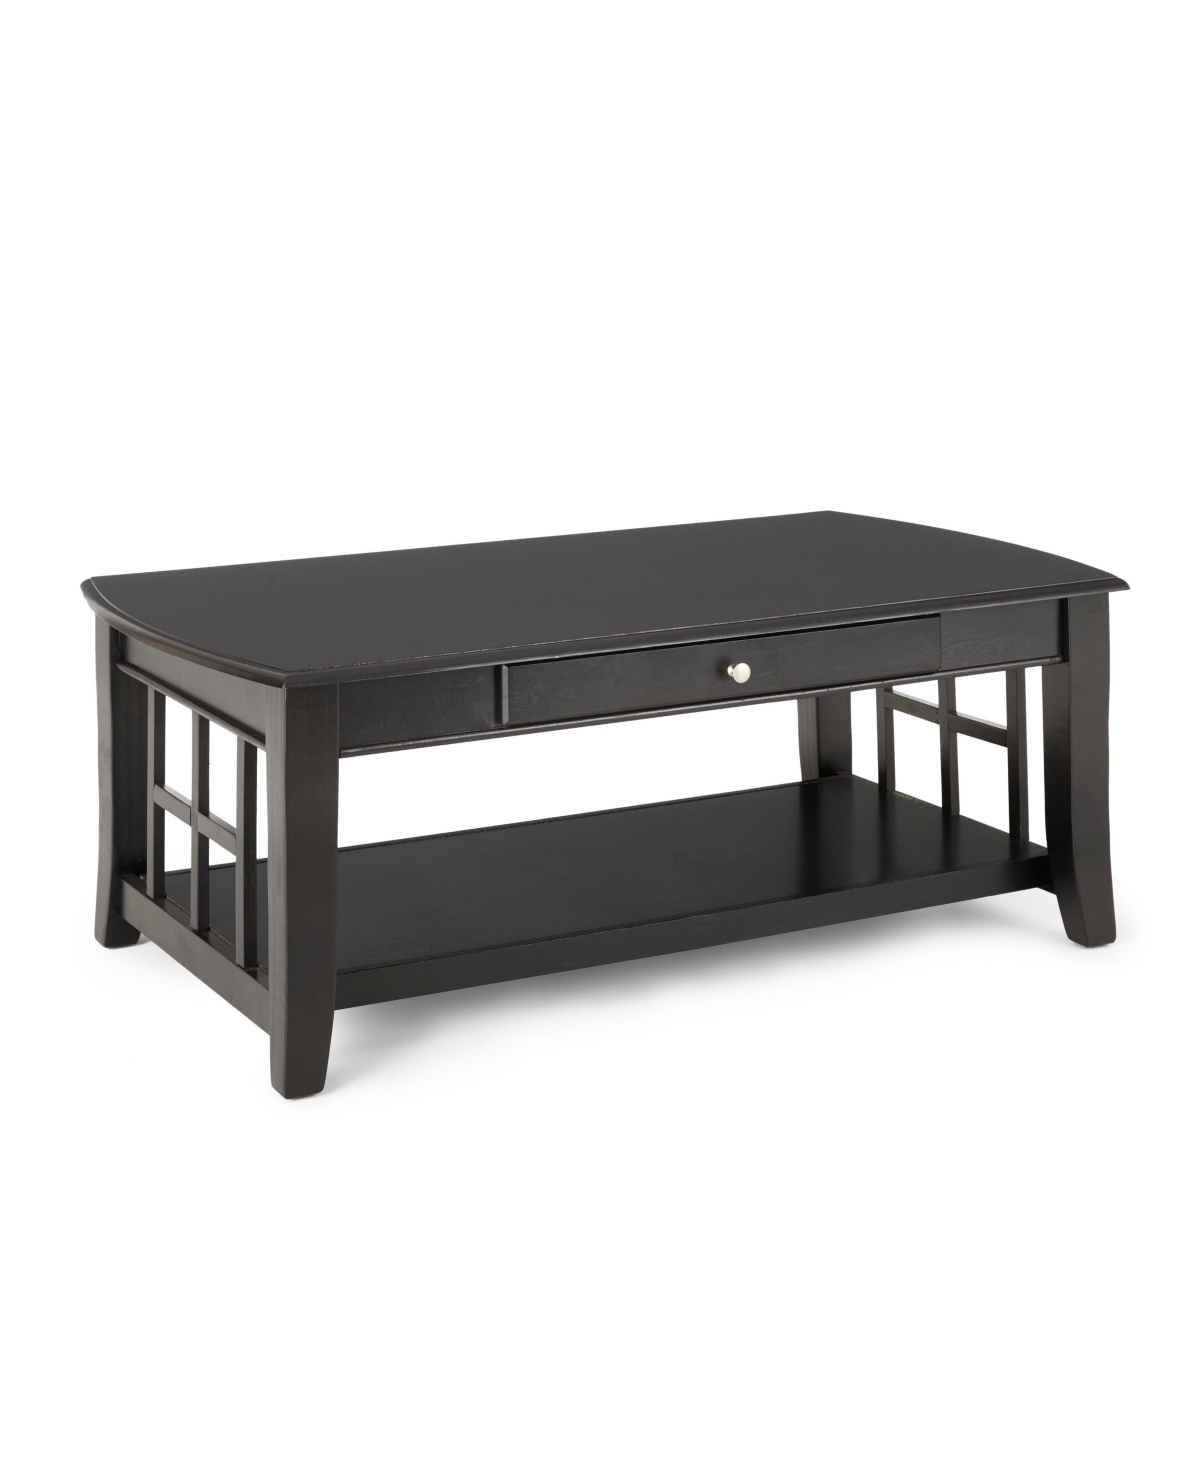 Steve Silver Cassidy 50" Wood Cocktail Table In Ebony Finish